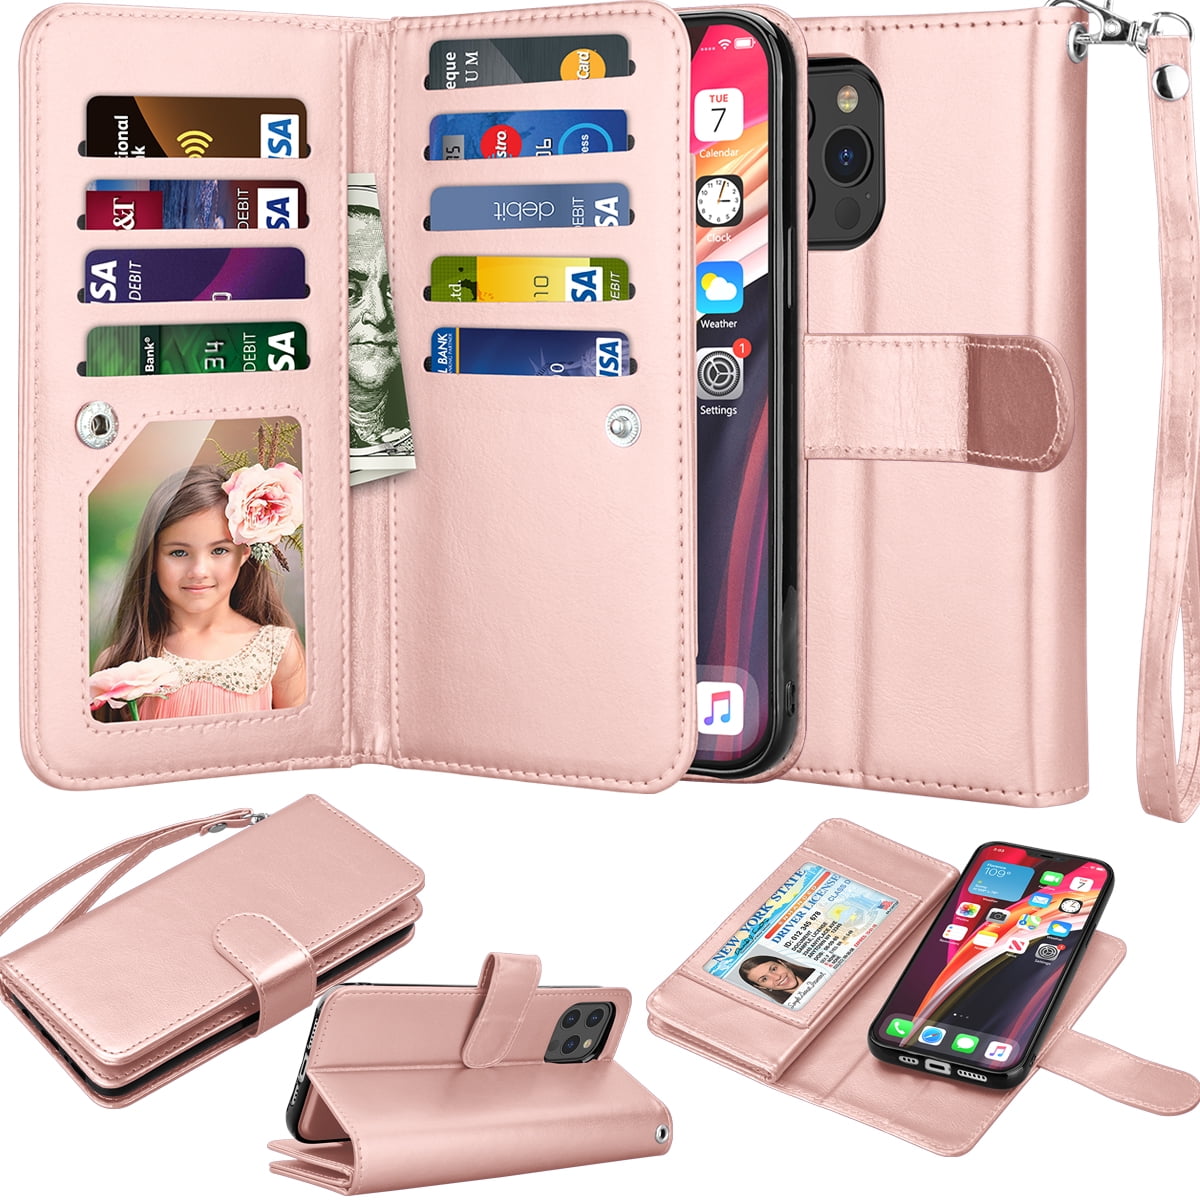 iPhone Xs Max Flip Case Cover for iPhone Xs Max Leather Extra-Durable Business Kickstand Card Holders Cell Phone case with Free Waterproof-Bag Delicate 